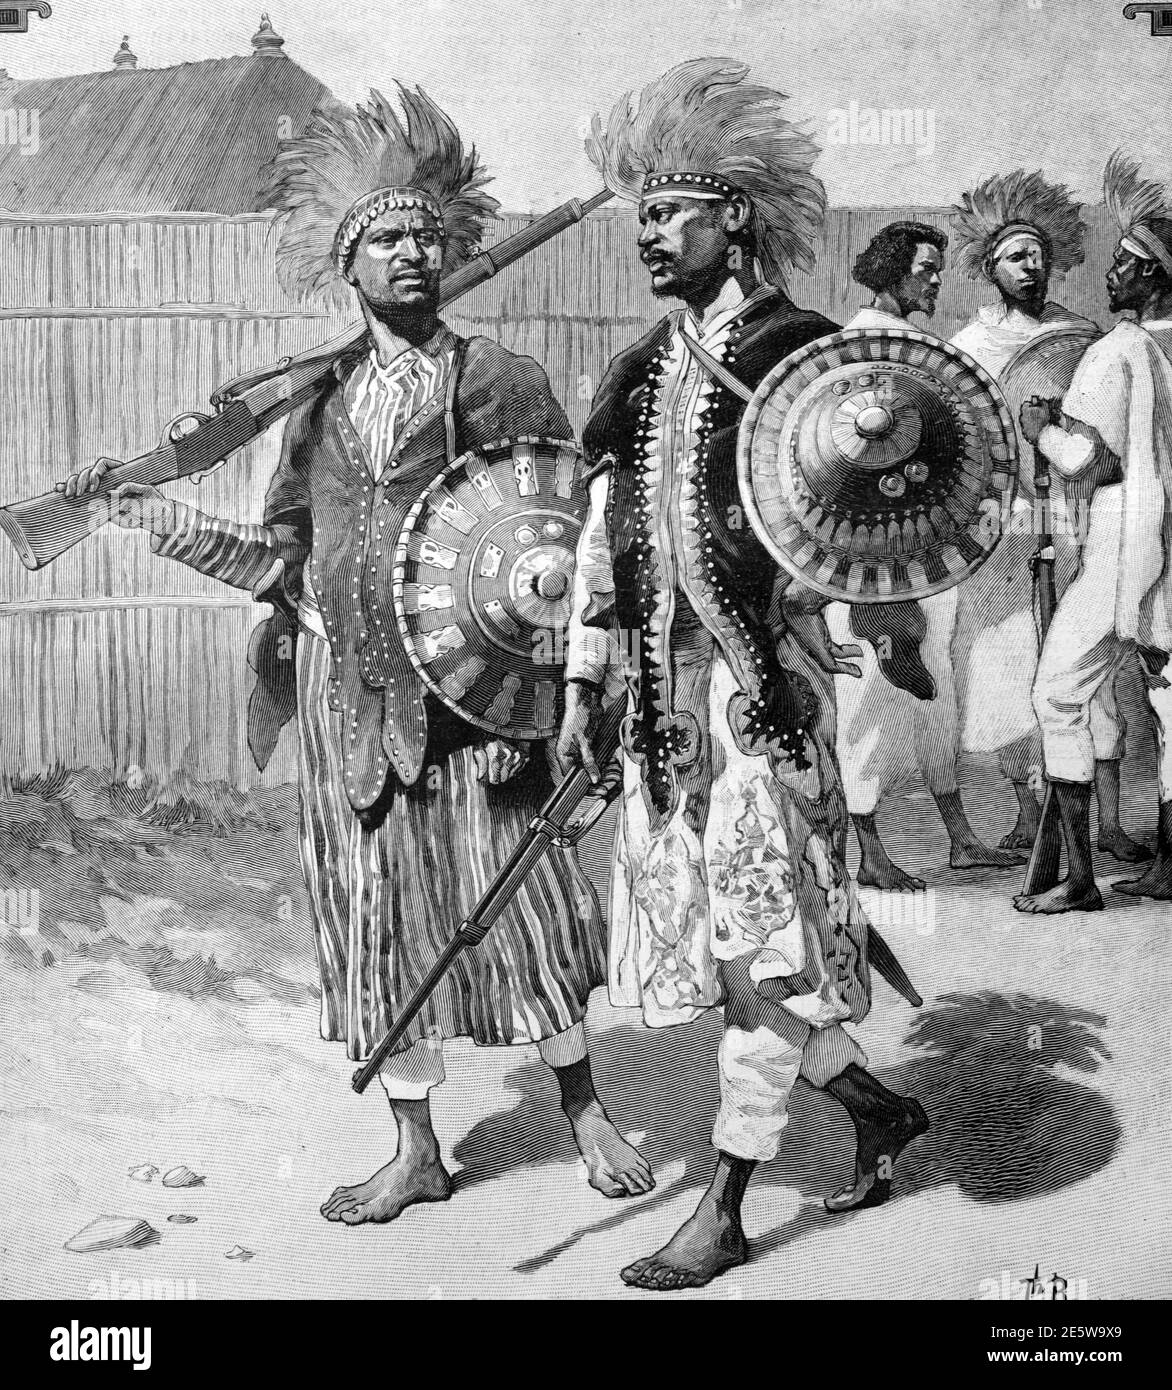 Menelik Guards, Abyssinian or Ethiopian Soldiers in Traditional Military Uniform carrying Shields and Rifles Ethiopia 1903 Vintage Illustration or Engraving Stock Photo